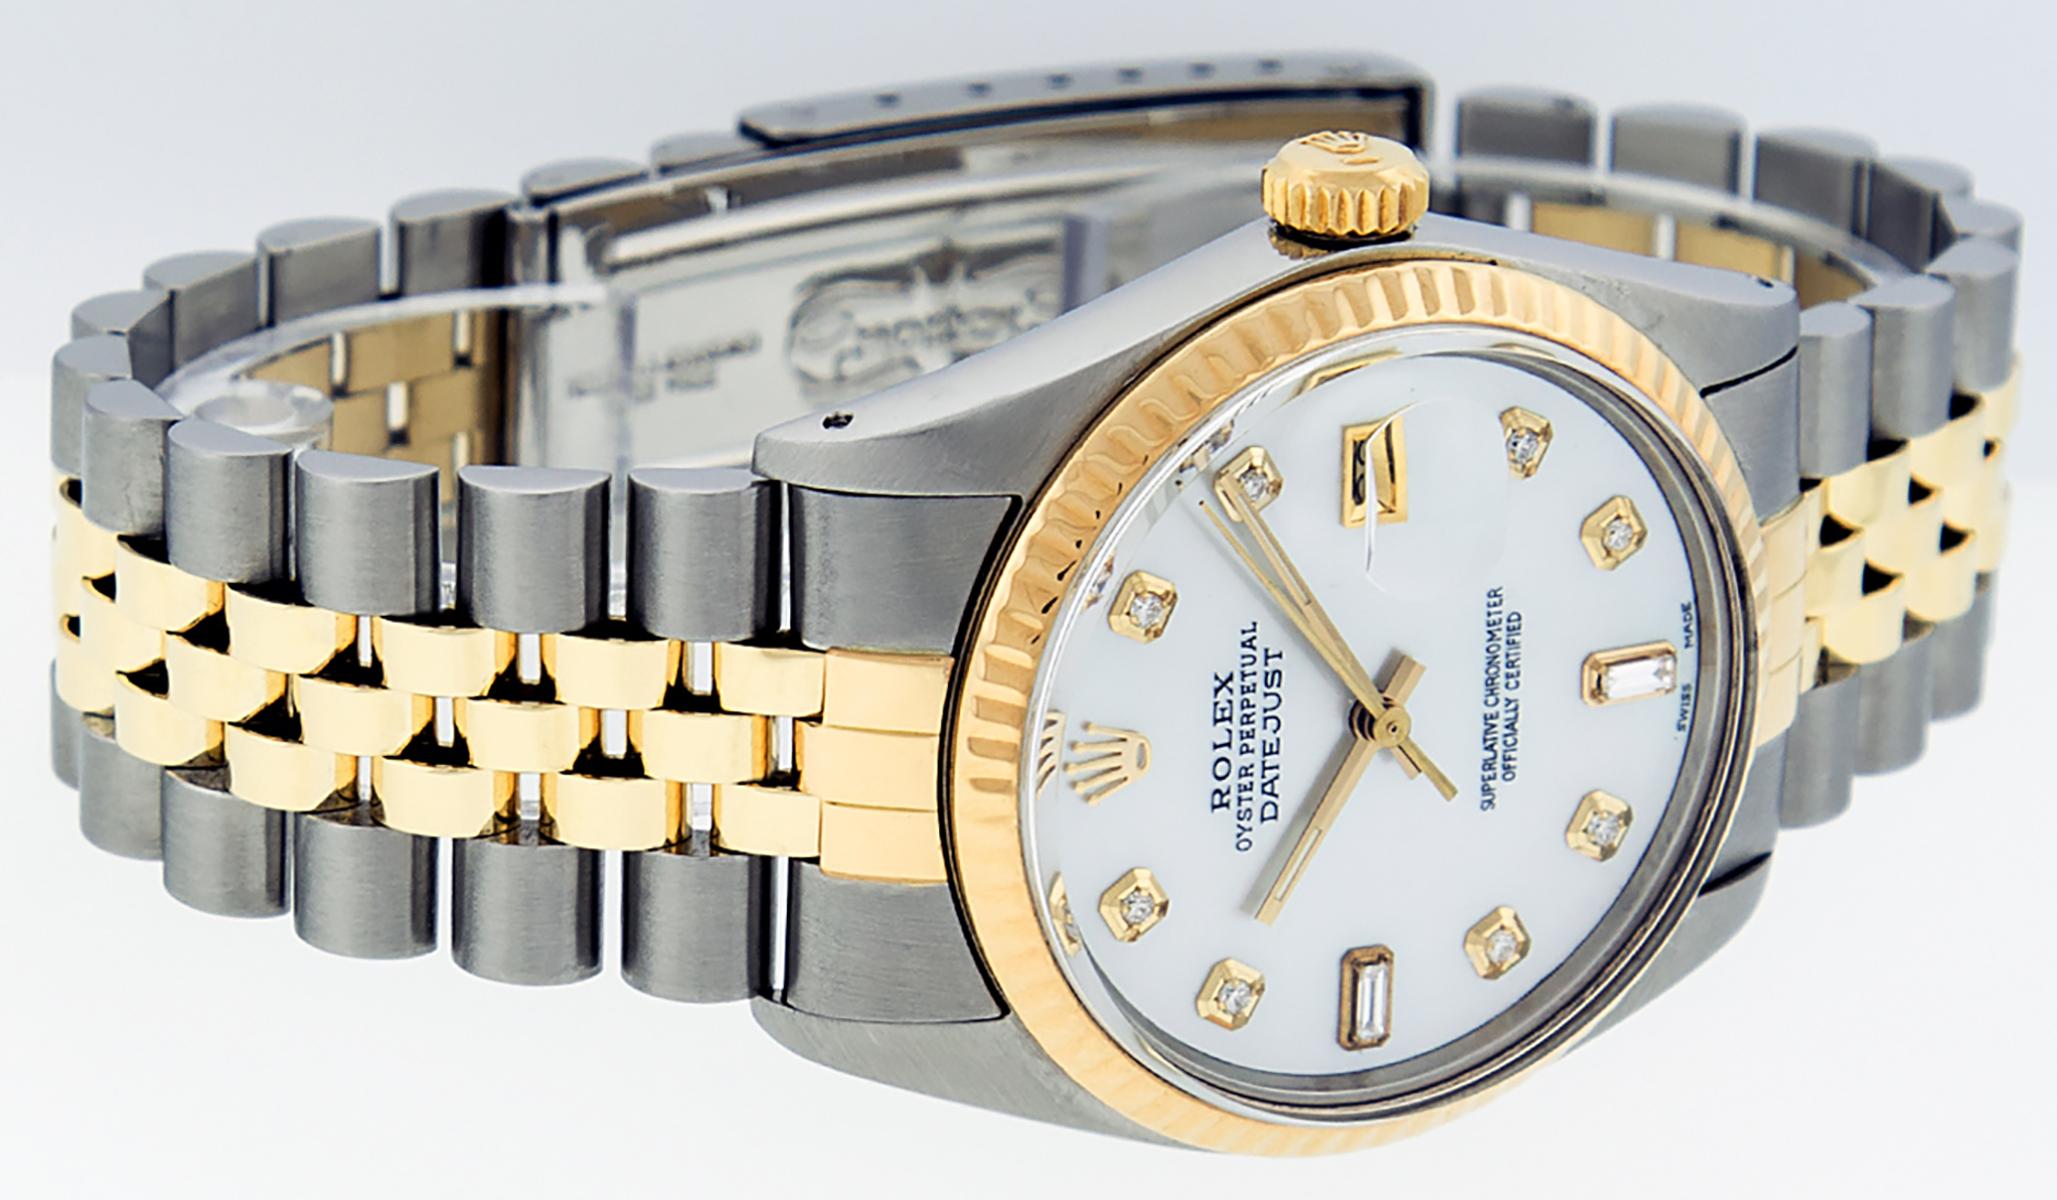 WATCH DESCRIPTION
 
BRAND : Rolex
MODEL : Datejust
CASE SIZE : 36mm
GENDER : Men's

WATCH FEATURES
 
DIAL : Refinished Mother of Pearl Dial set with Aftermarket Genuine 8 Round Diamond and 2 Baguette Diamond Hour Markers 
BEZEL : Rolex Yellow Gold